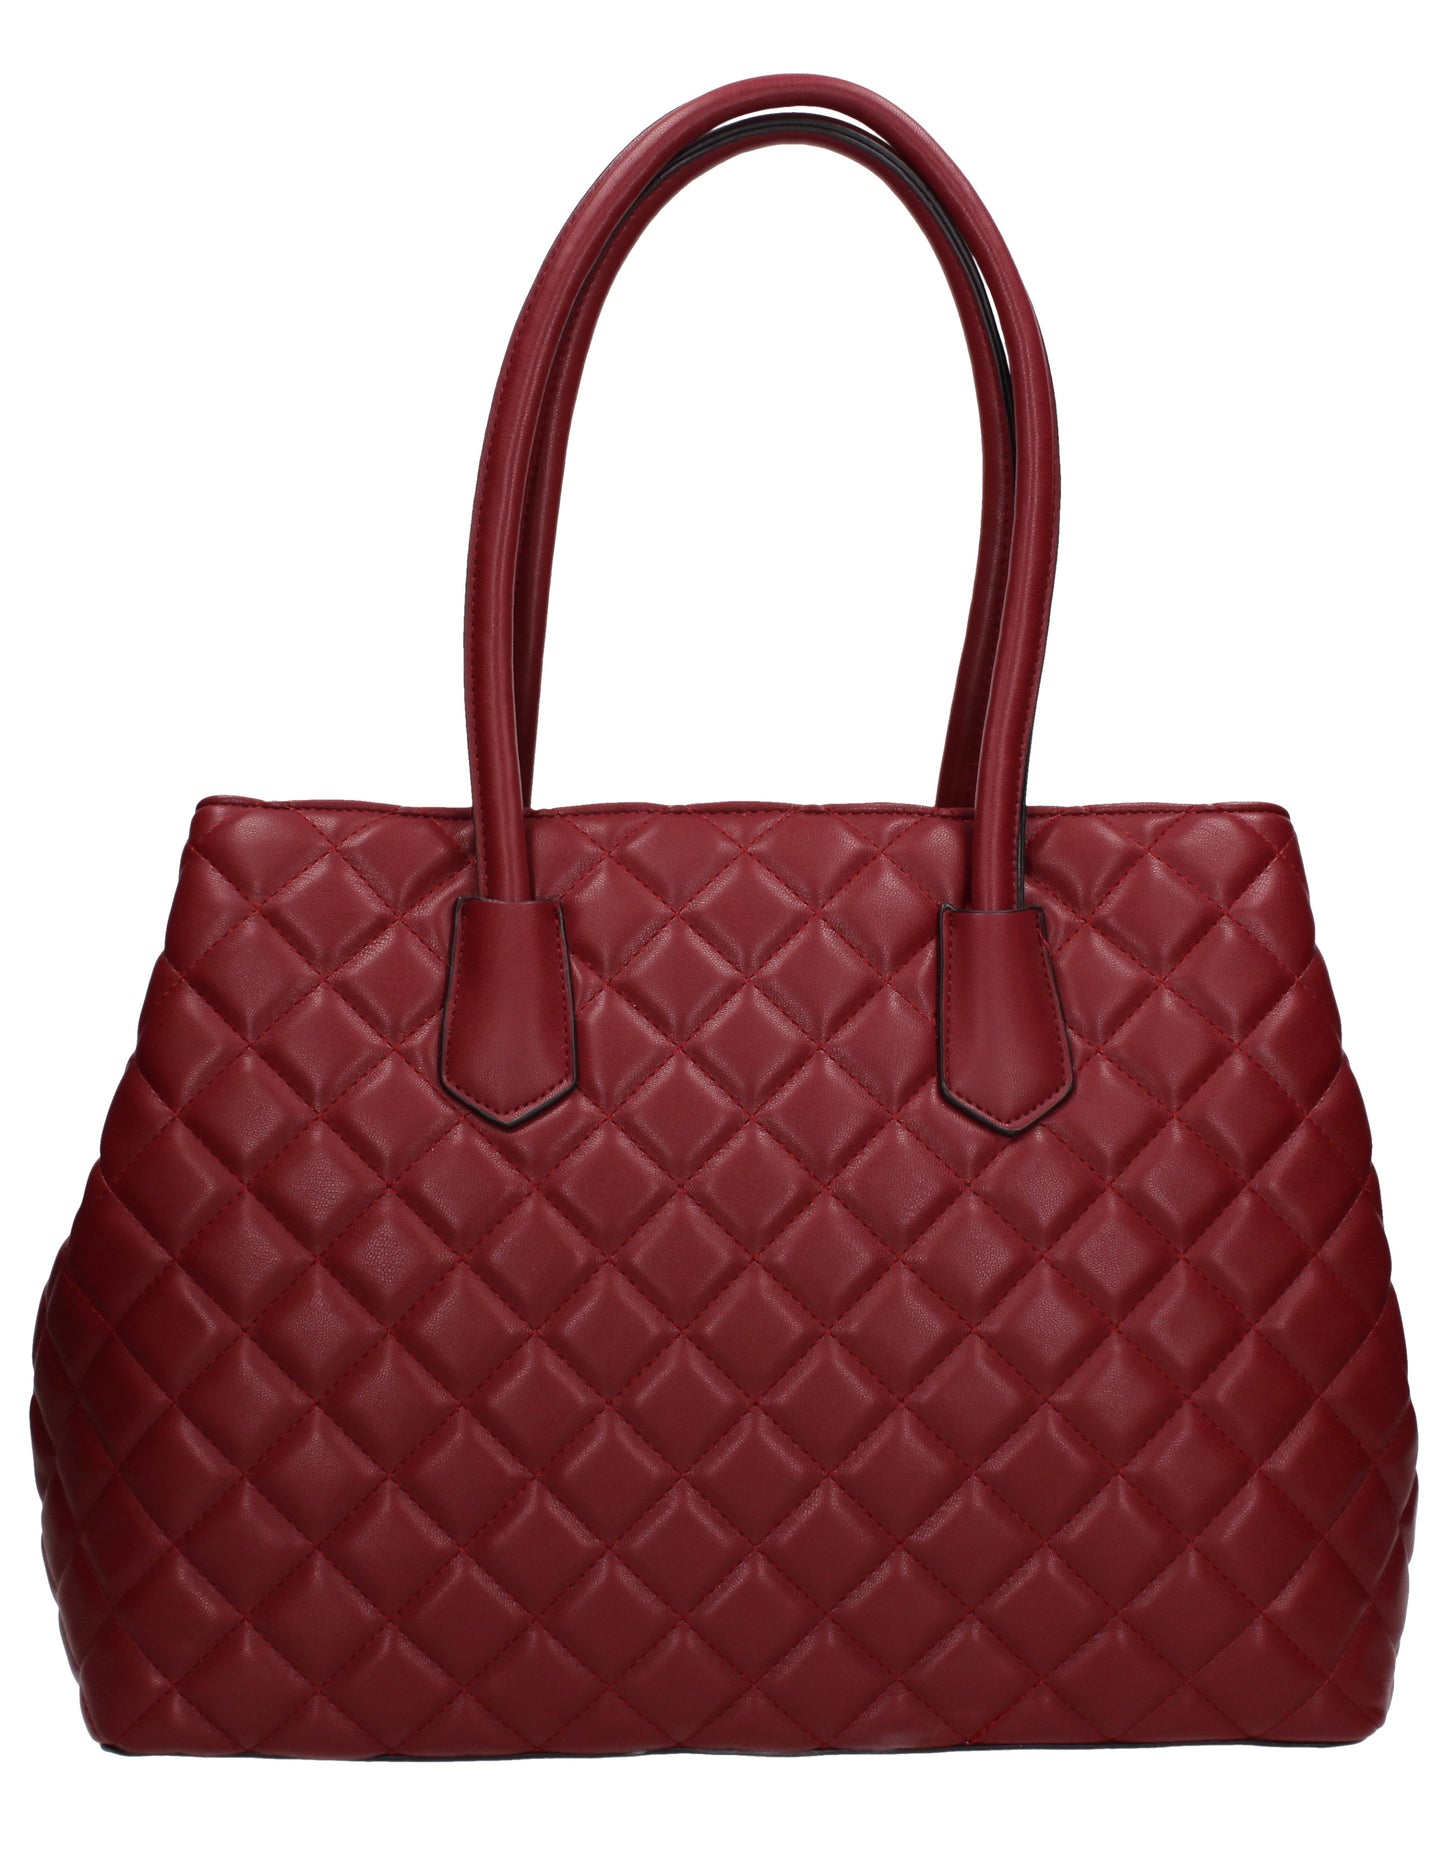 Buy your Valeria Handbag Burgundy Today! Buy with confidence from Swankyswans